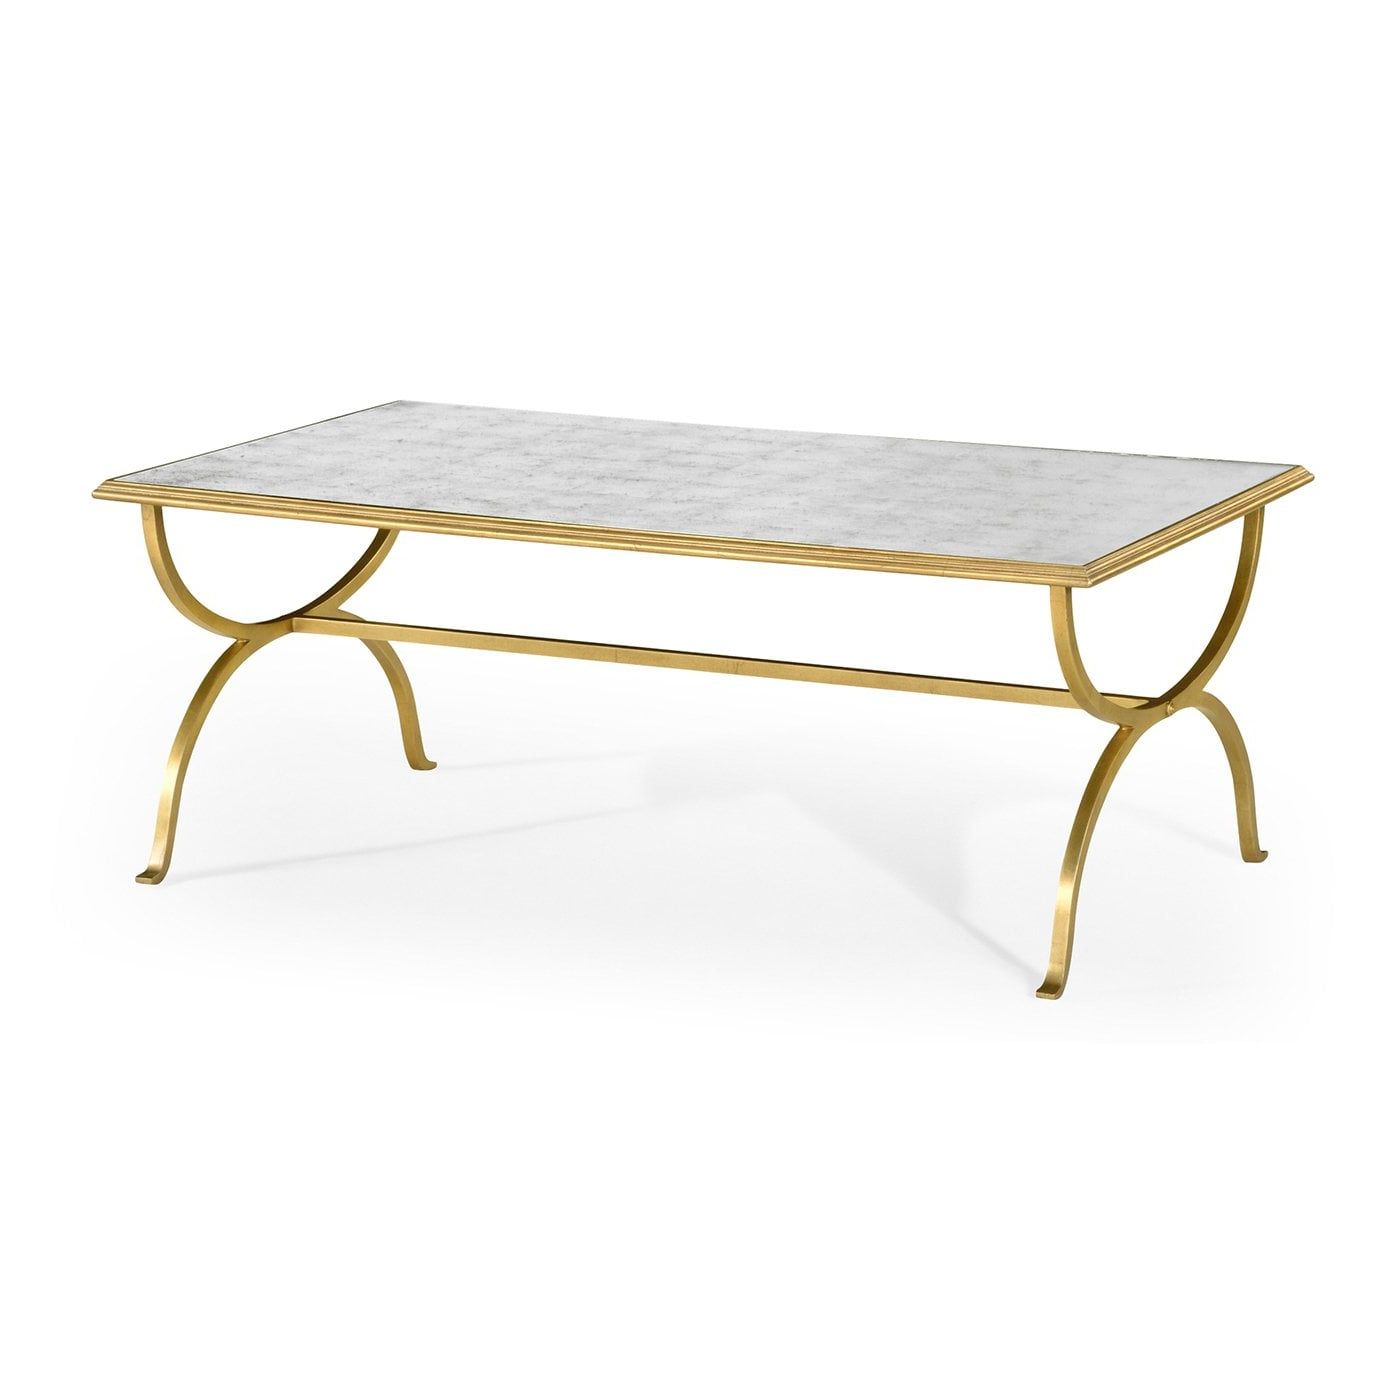 Rectangular Gold Coffee Table With Glass Top (View 5 of 10)